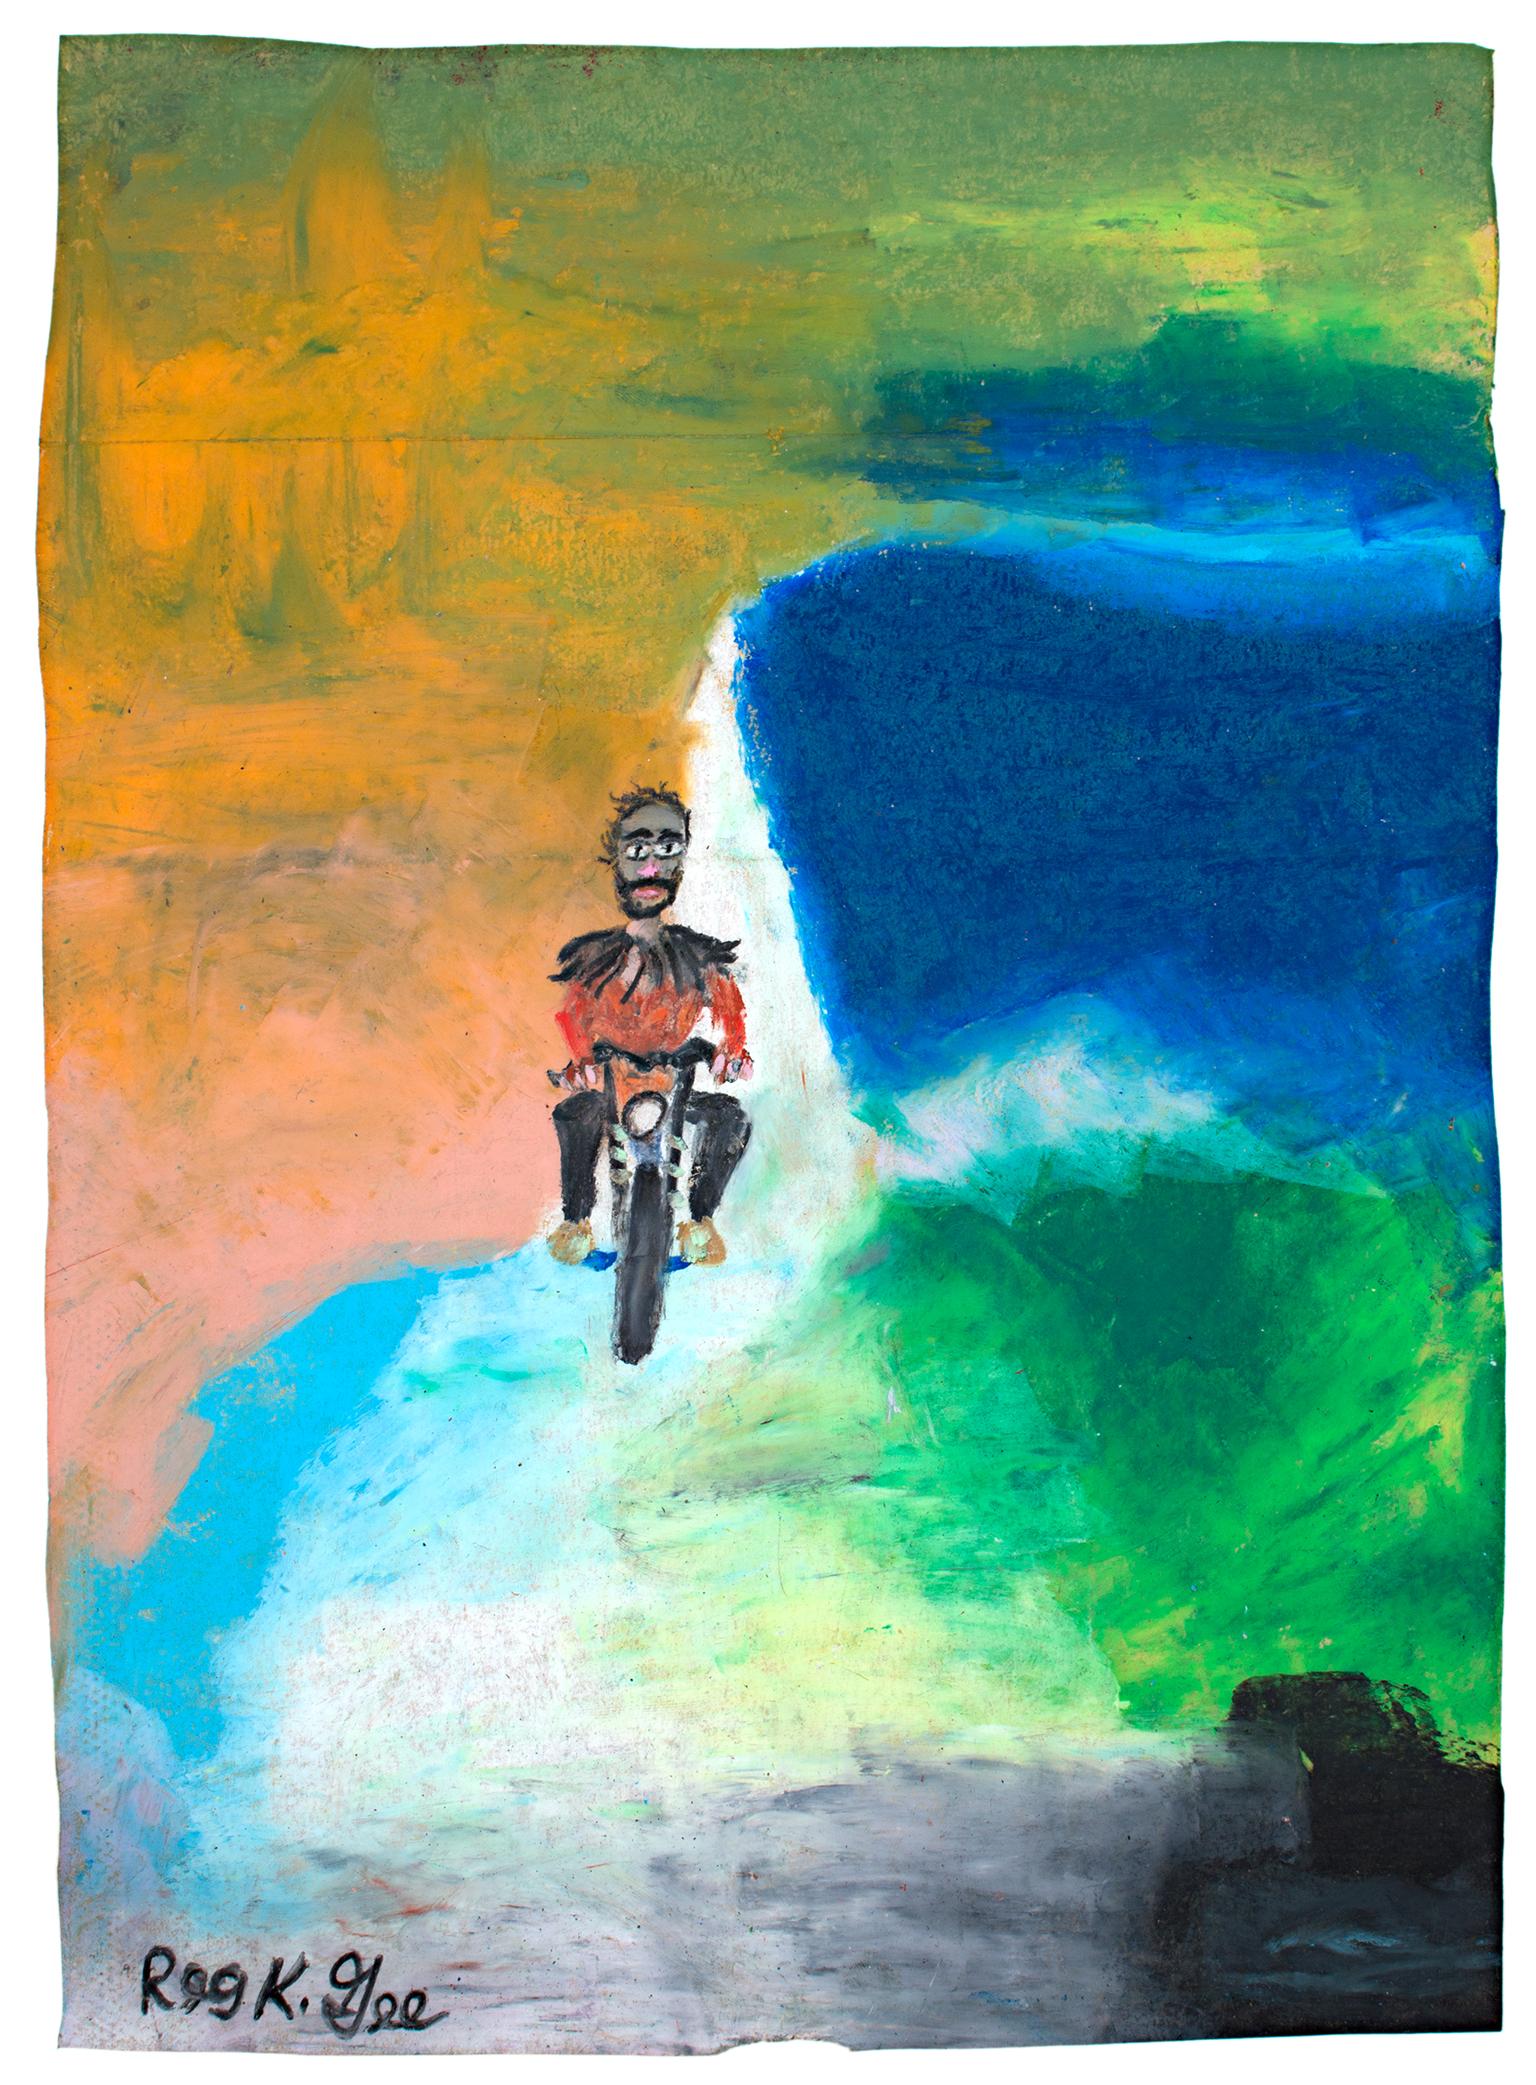 "Life Long Breezer" is an original oil pastel drawing on grocery bag by Reginald K. Gee. The artist signed the piece lower left. It features a man on a motorcycle with a multi-colored background. 

16 1/2" x 12" art
Custom framing is